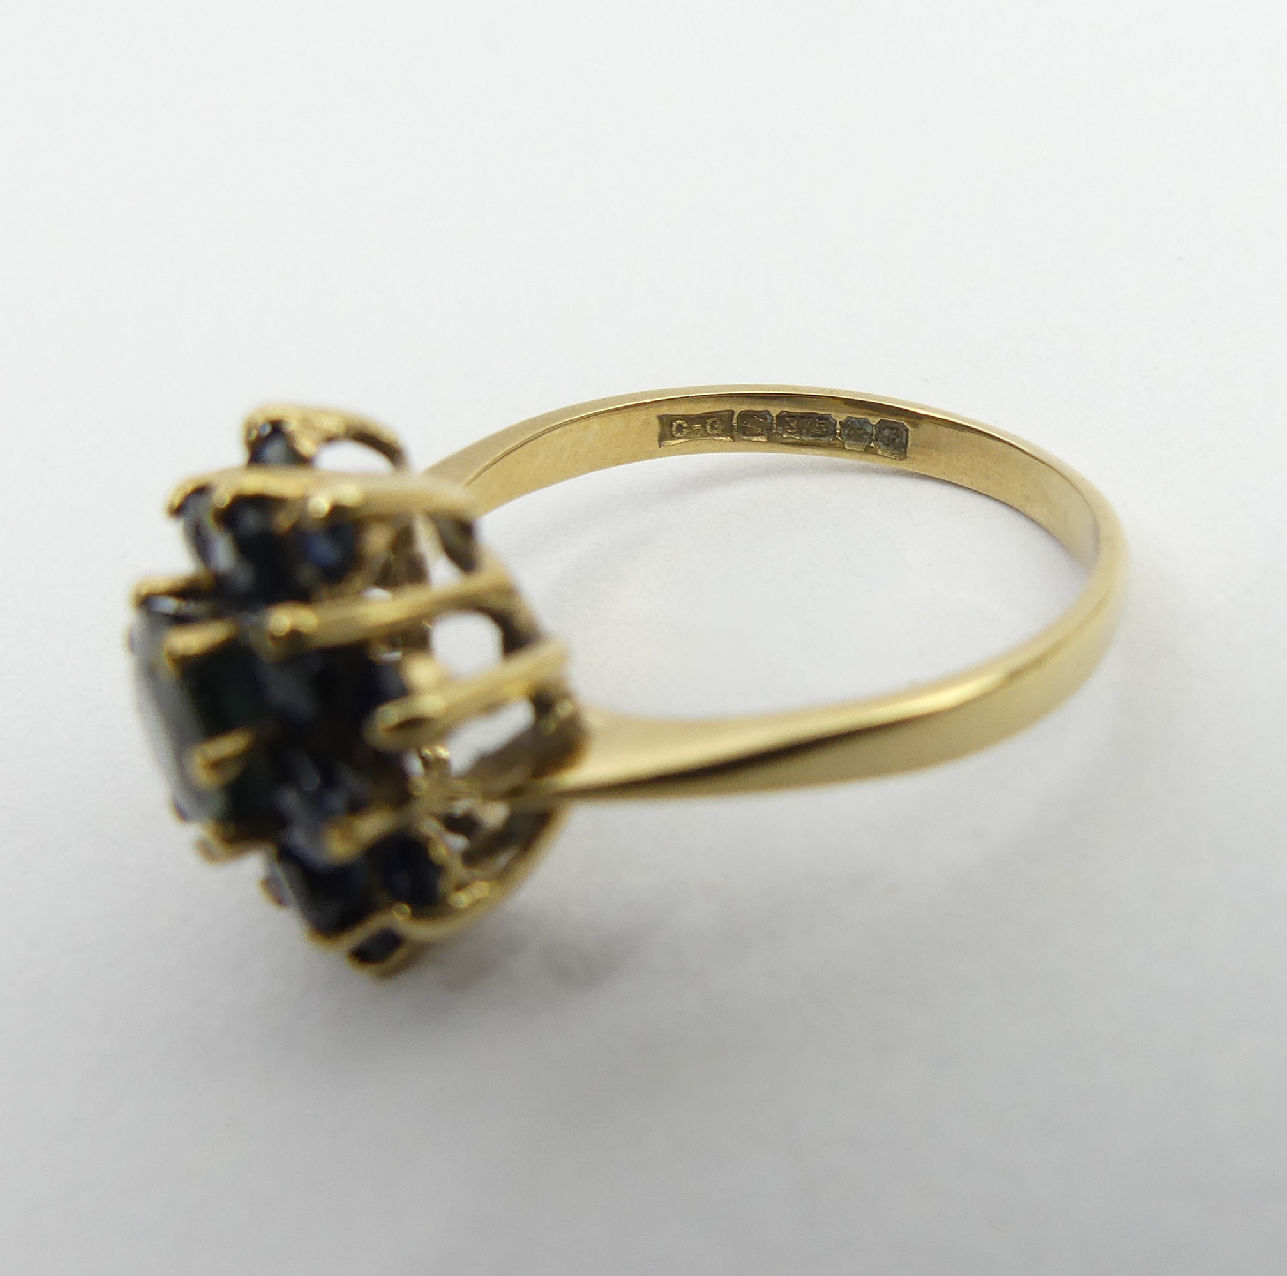 9ct gold sapphire cluster ring, Birm. 1980, 3.4 grams, 14mm, size Q. UK postage £12 - Image 6 of 6